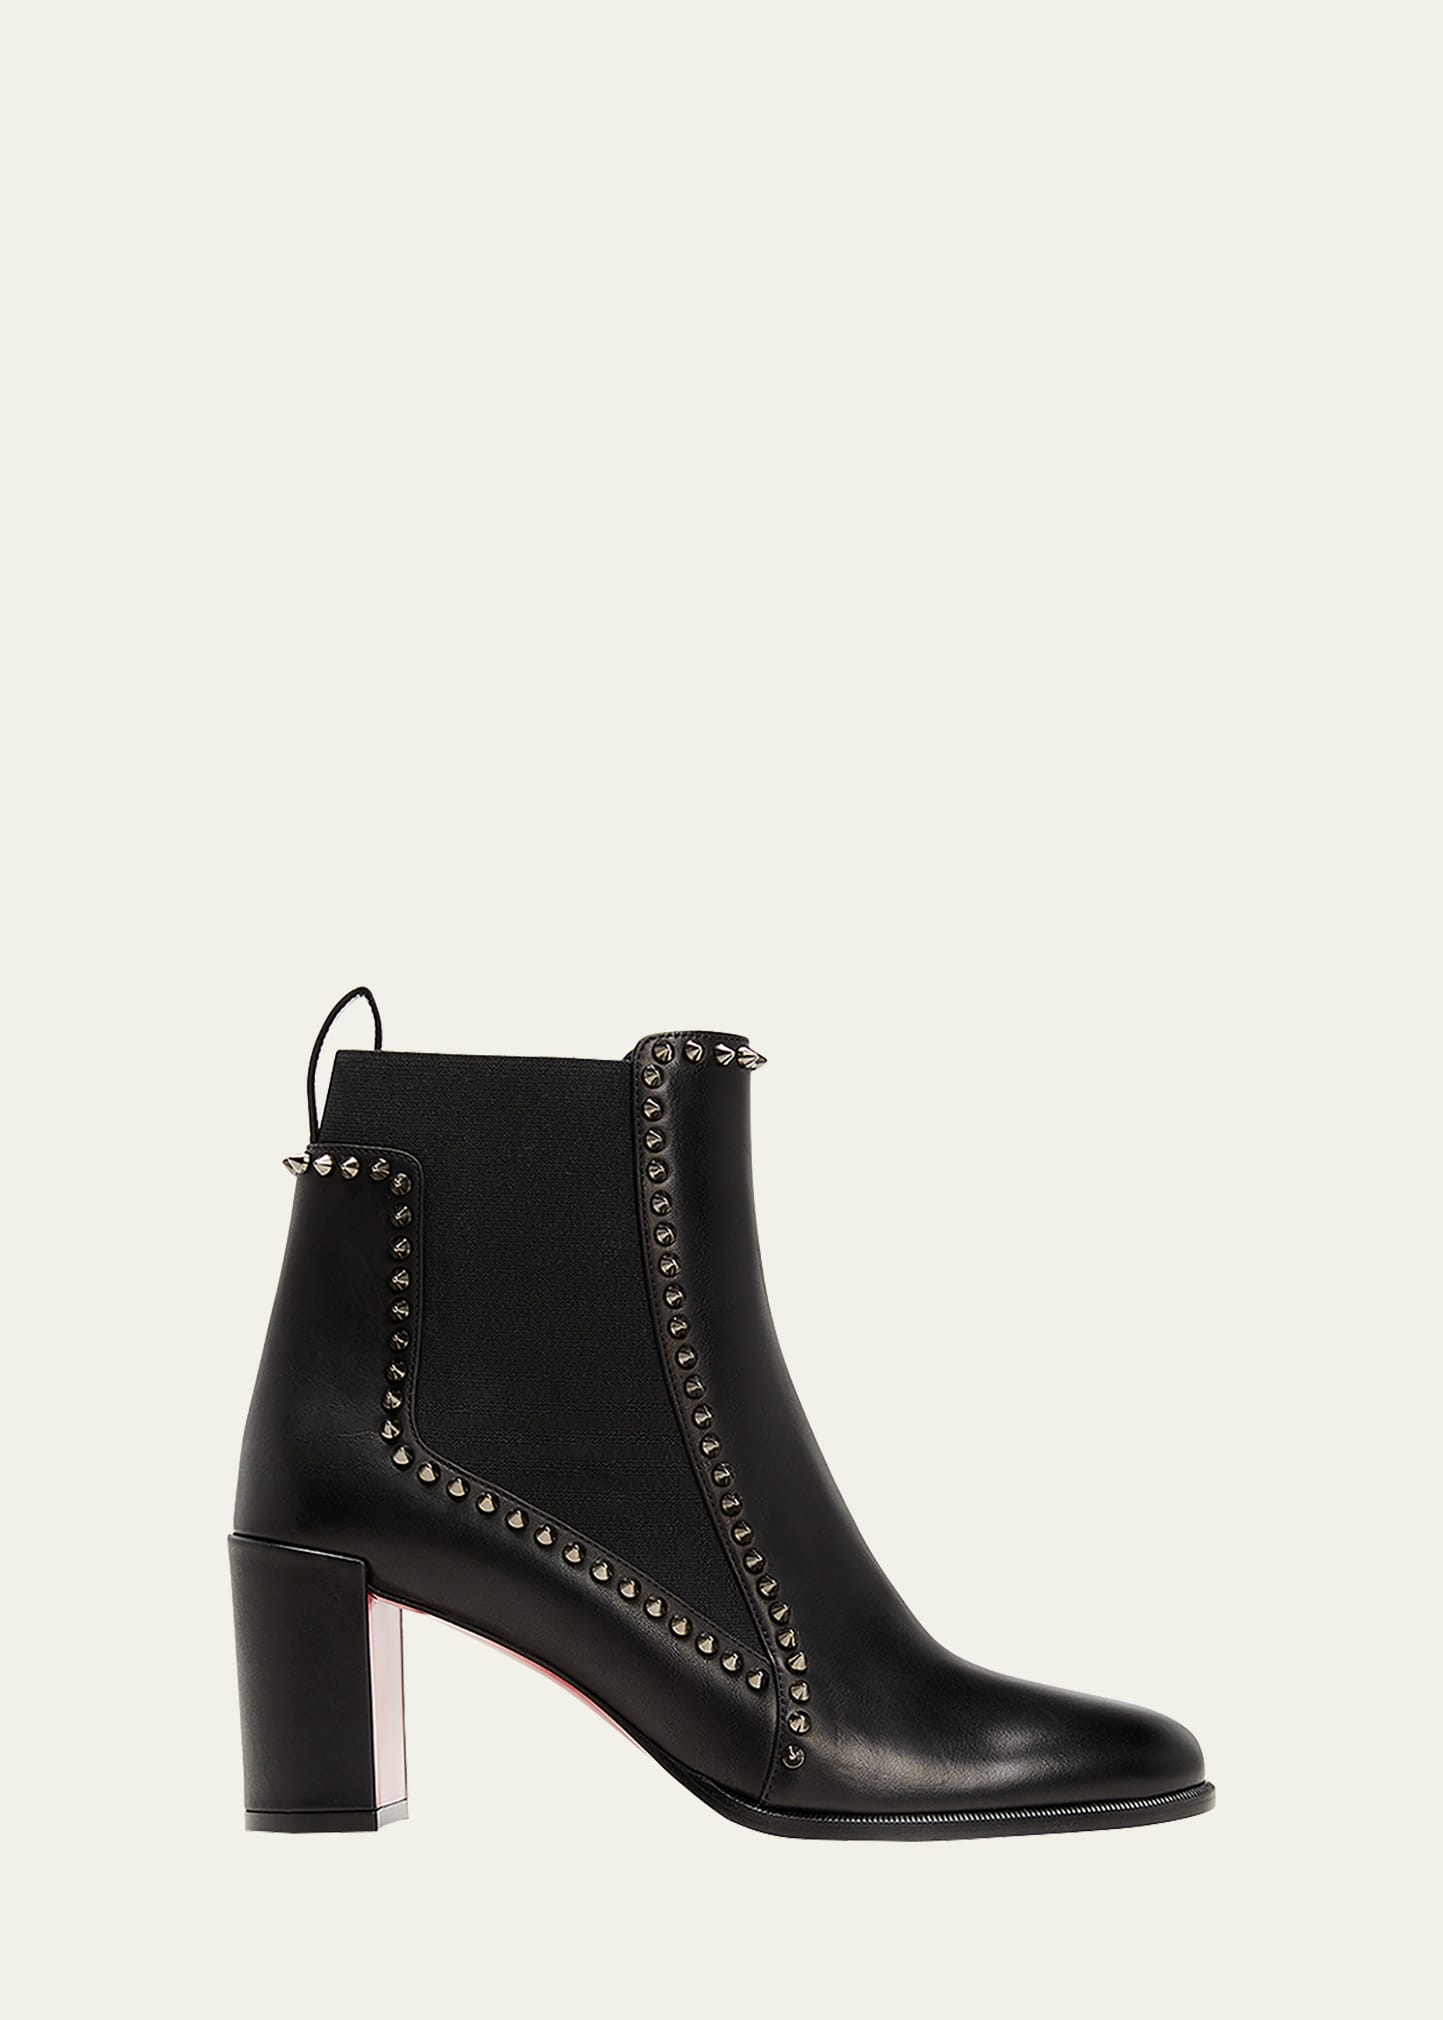 Outline Spikes Red Sole Chelsea Booties